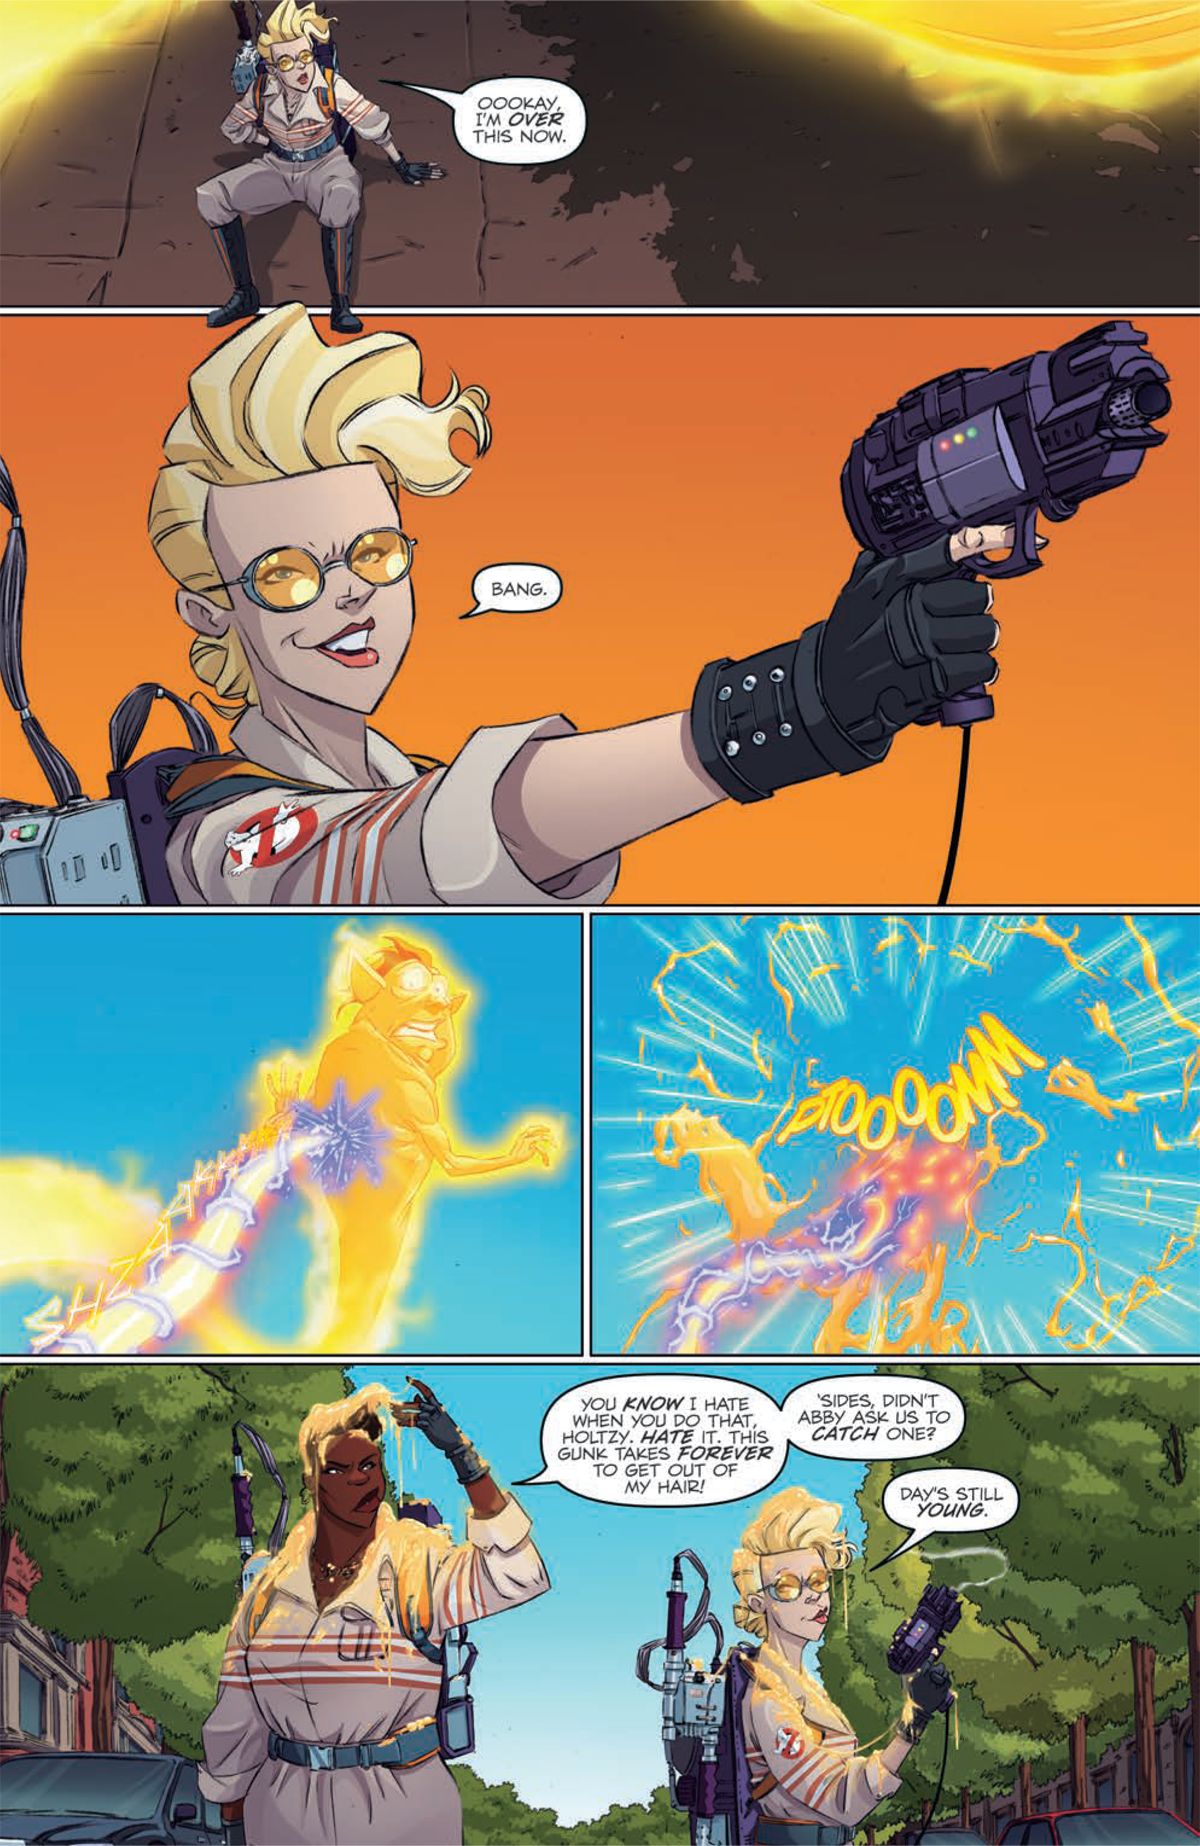 Patty And Holtzmann Are Back On The Hunt In A Look Inside The New Ghostbusters Comic